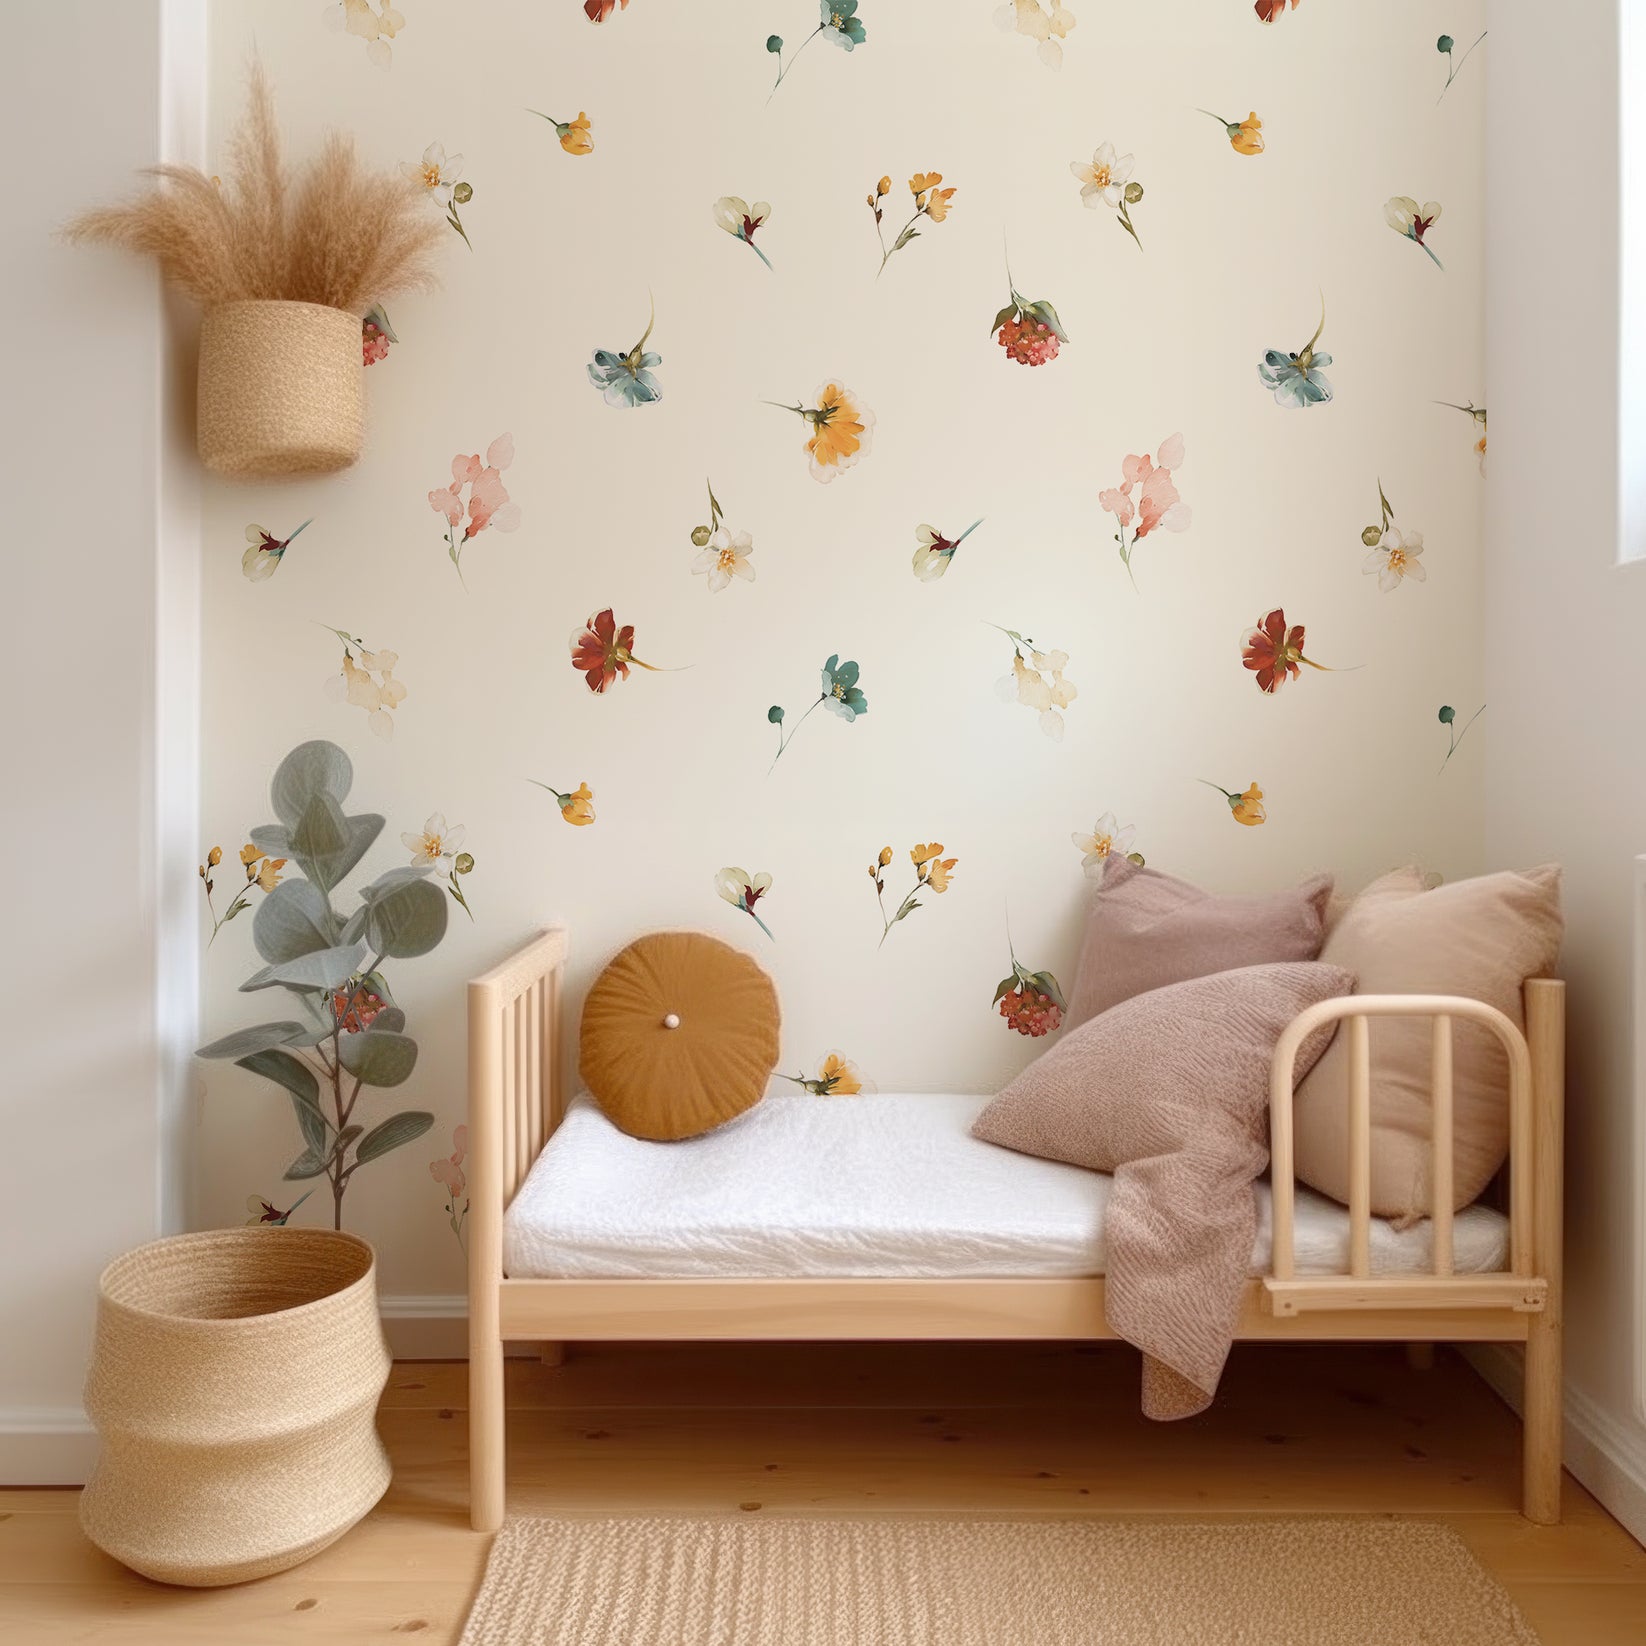 Watercolour Blossom Medley Floral Wallpaper In Child's Bedroom With Wooden Bed and Neutral Colored Cushions and Plants